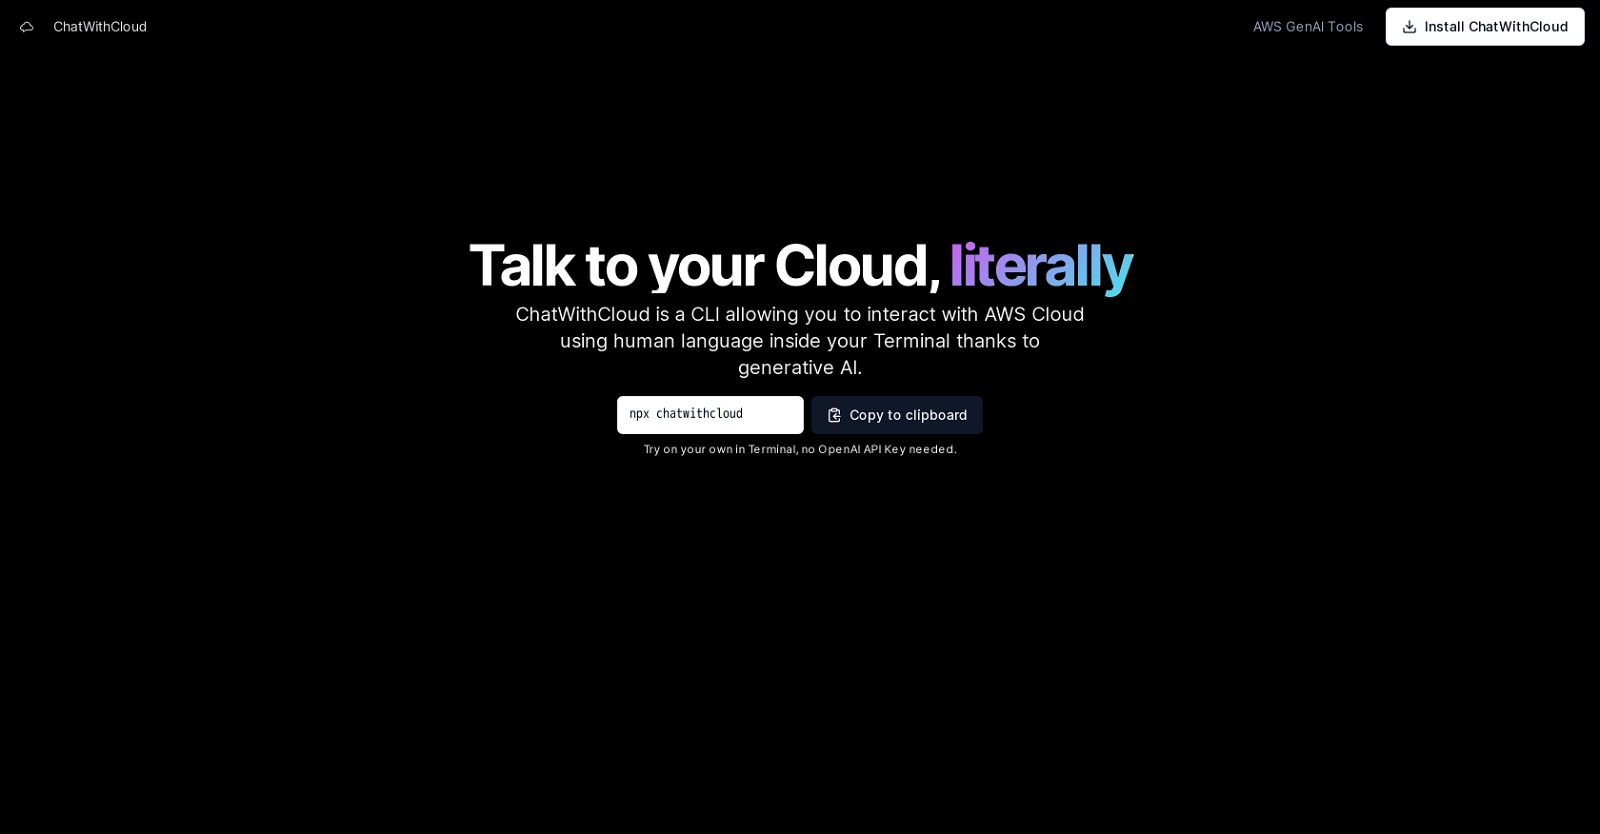 ChatWithCloud website